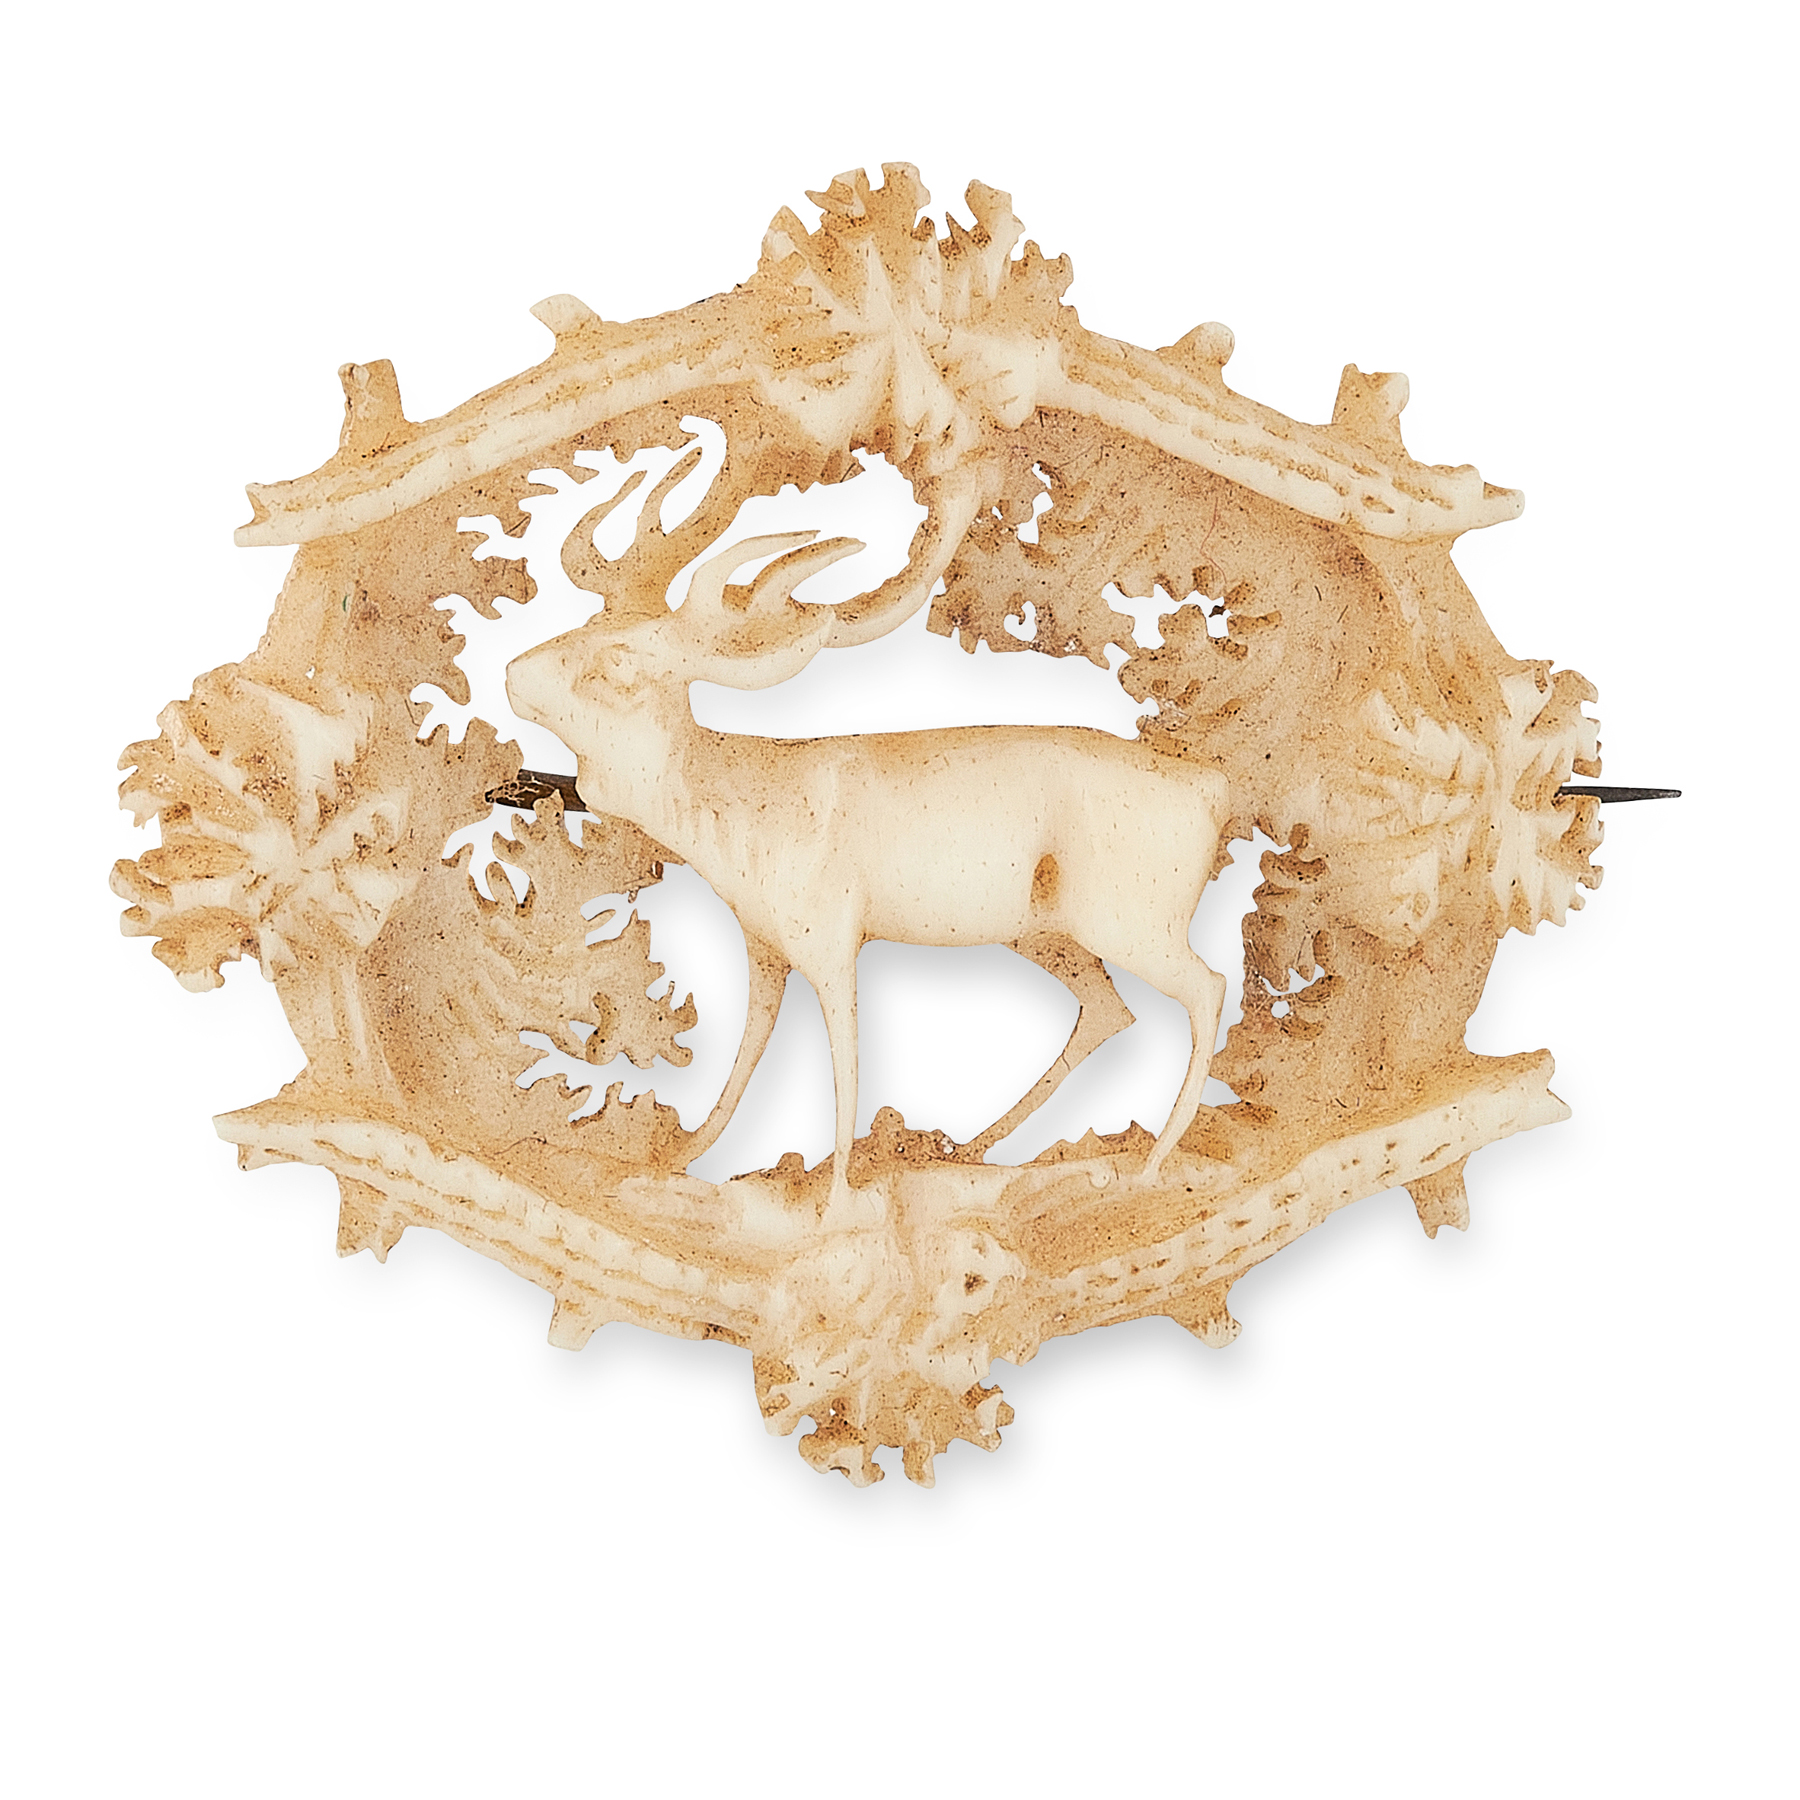 AN ANTIQUE VICTORIAN CARVED BONE BROOCH, 19TH CENTURY carved to depict a deer among foliage,